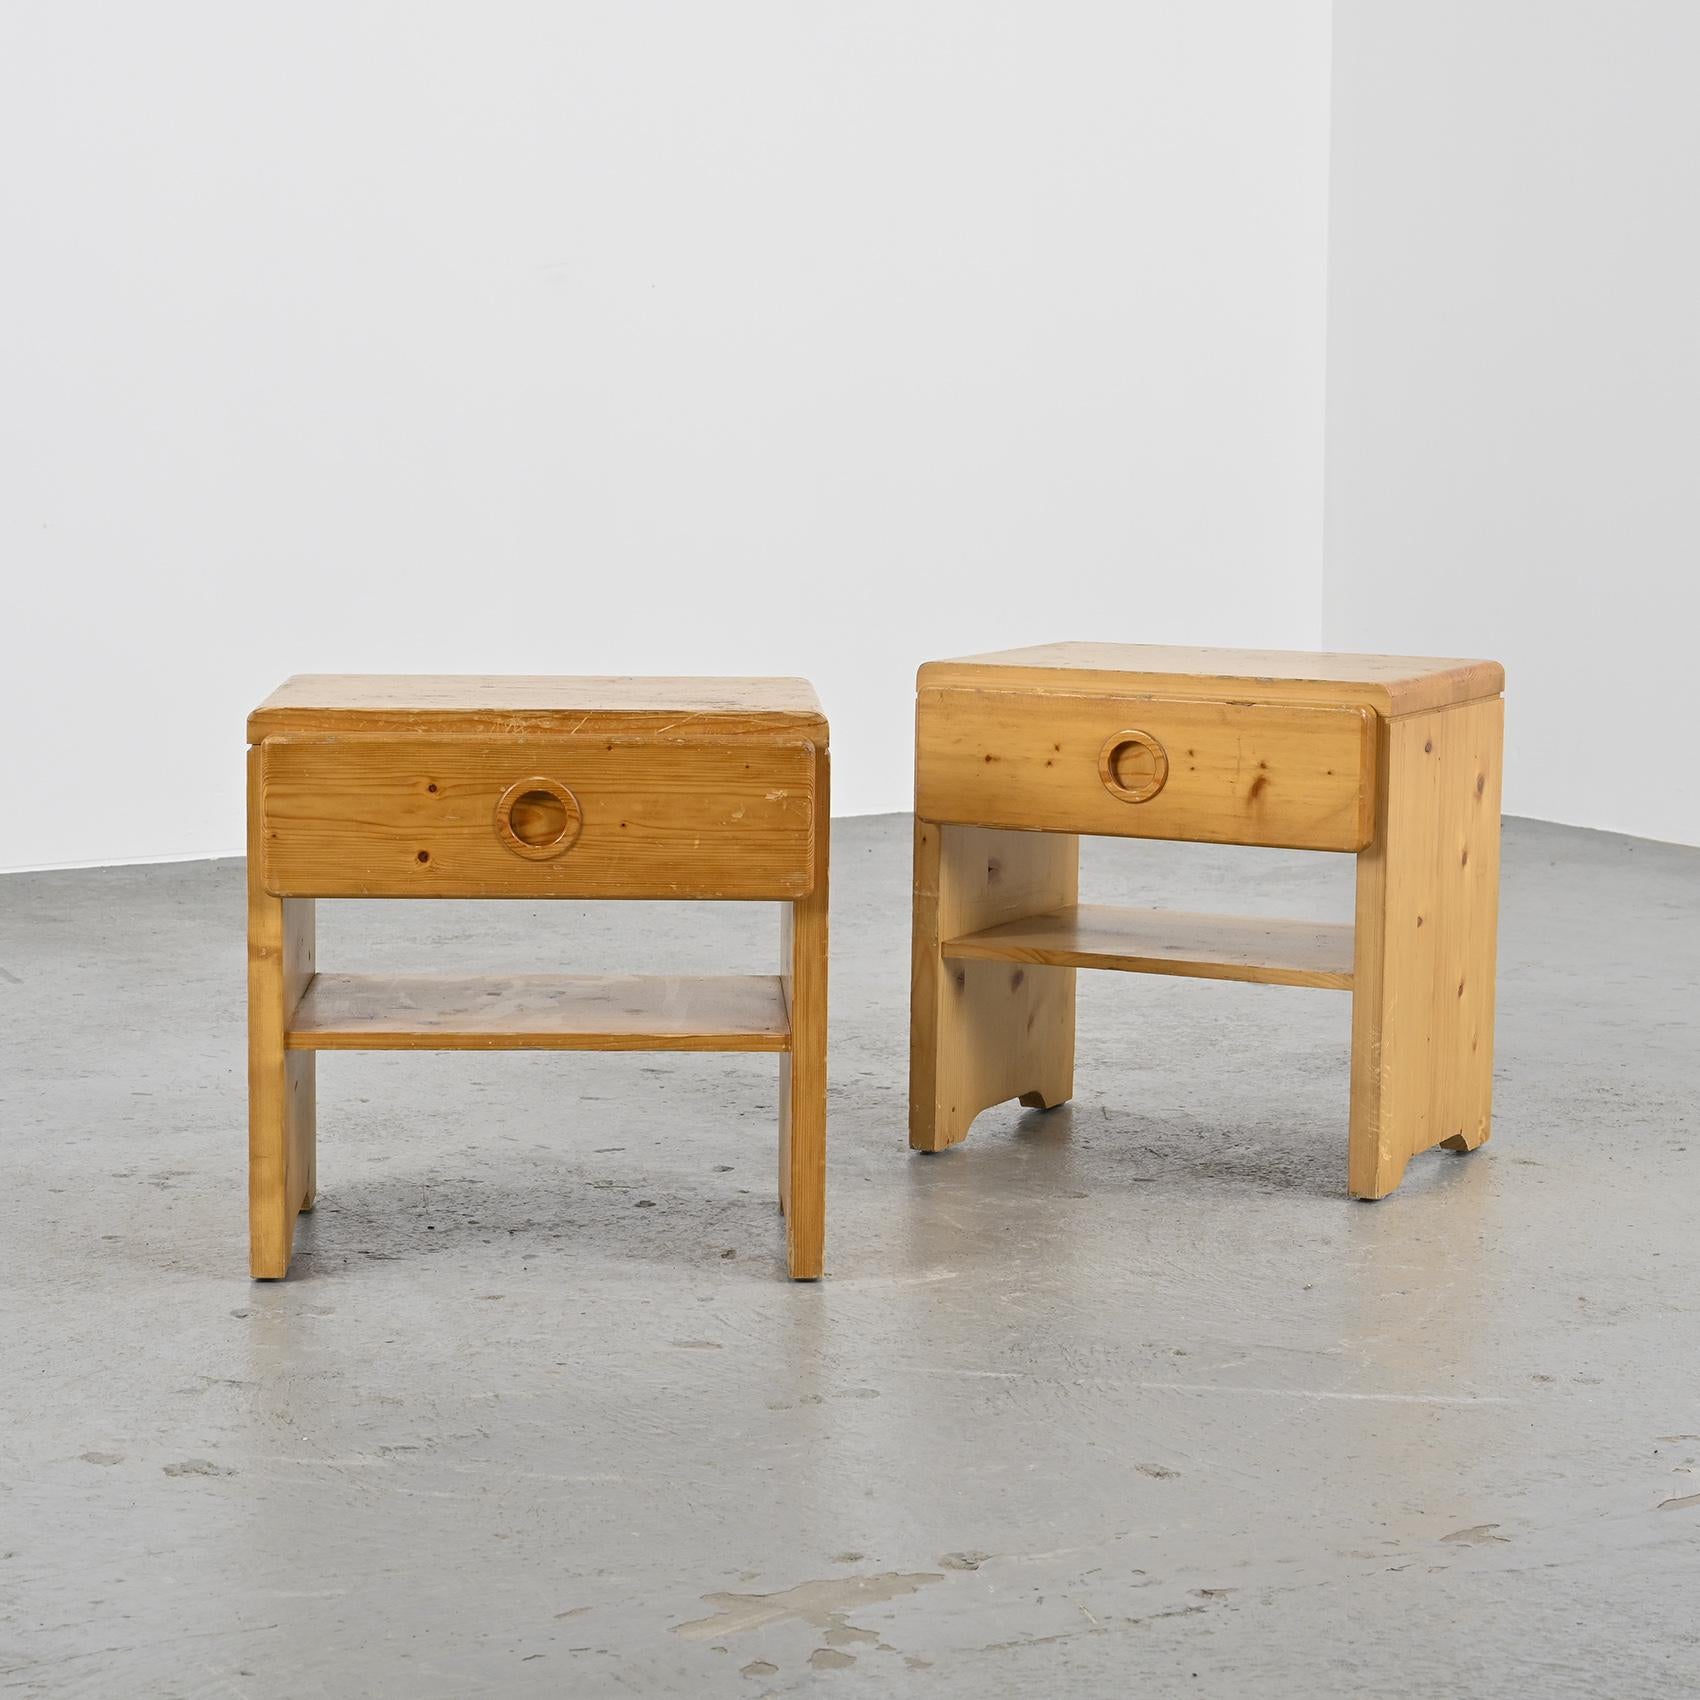 Selected By Charlotte Perriand For the Ski resort Les Arcs.

Pair of bedside tables with one drawer each, featuring circular pull handles, all made entirely of pine.

Selected for Les Arcs 1800 ski resort, circa 1975.